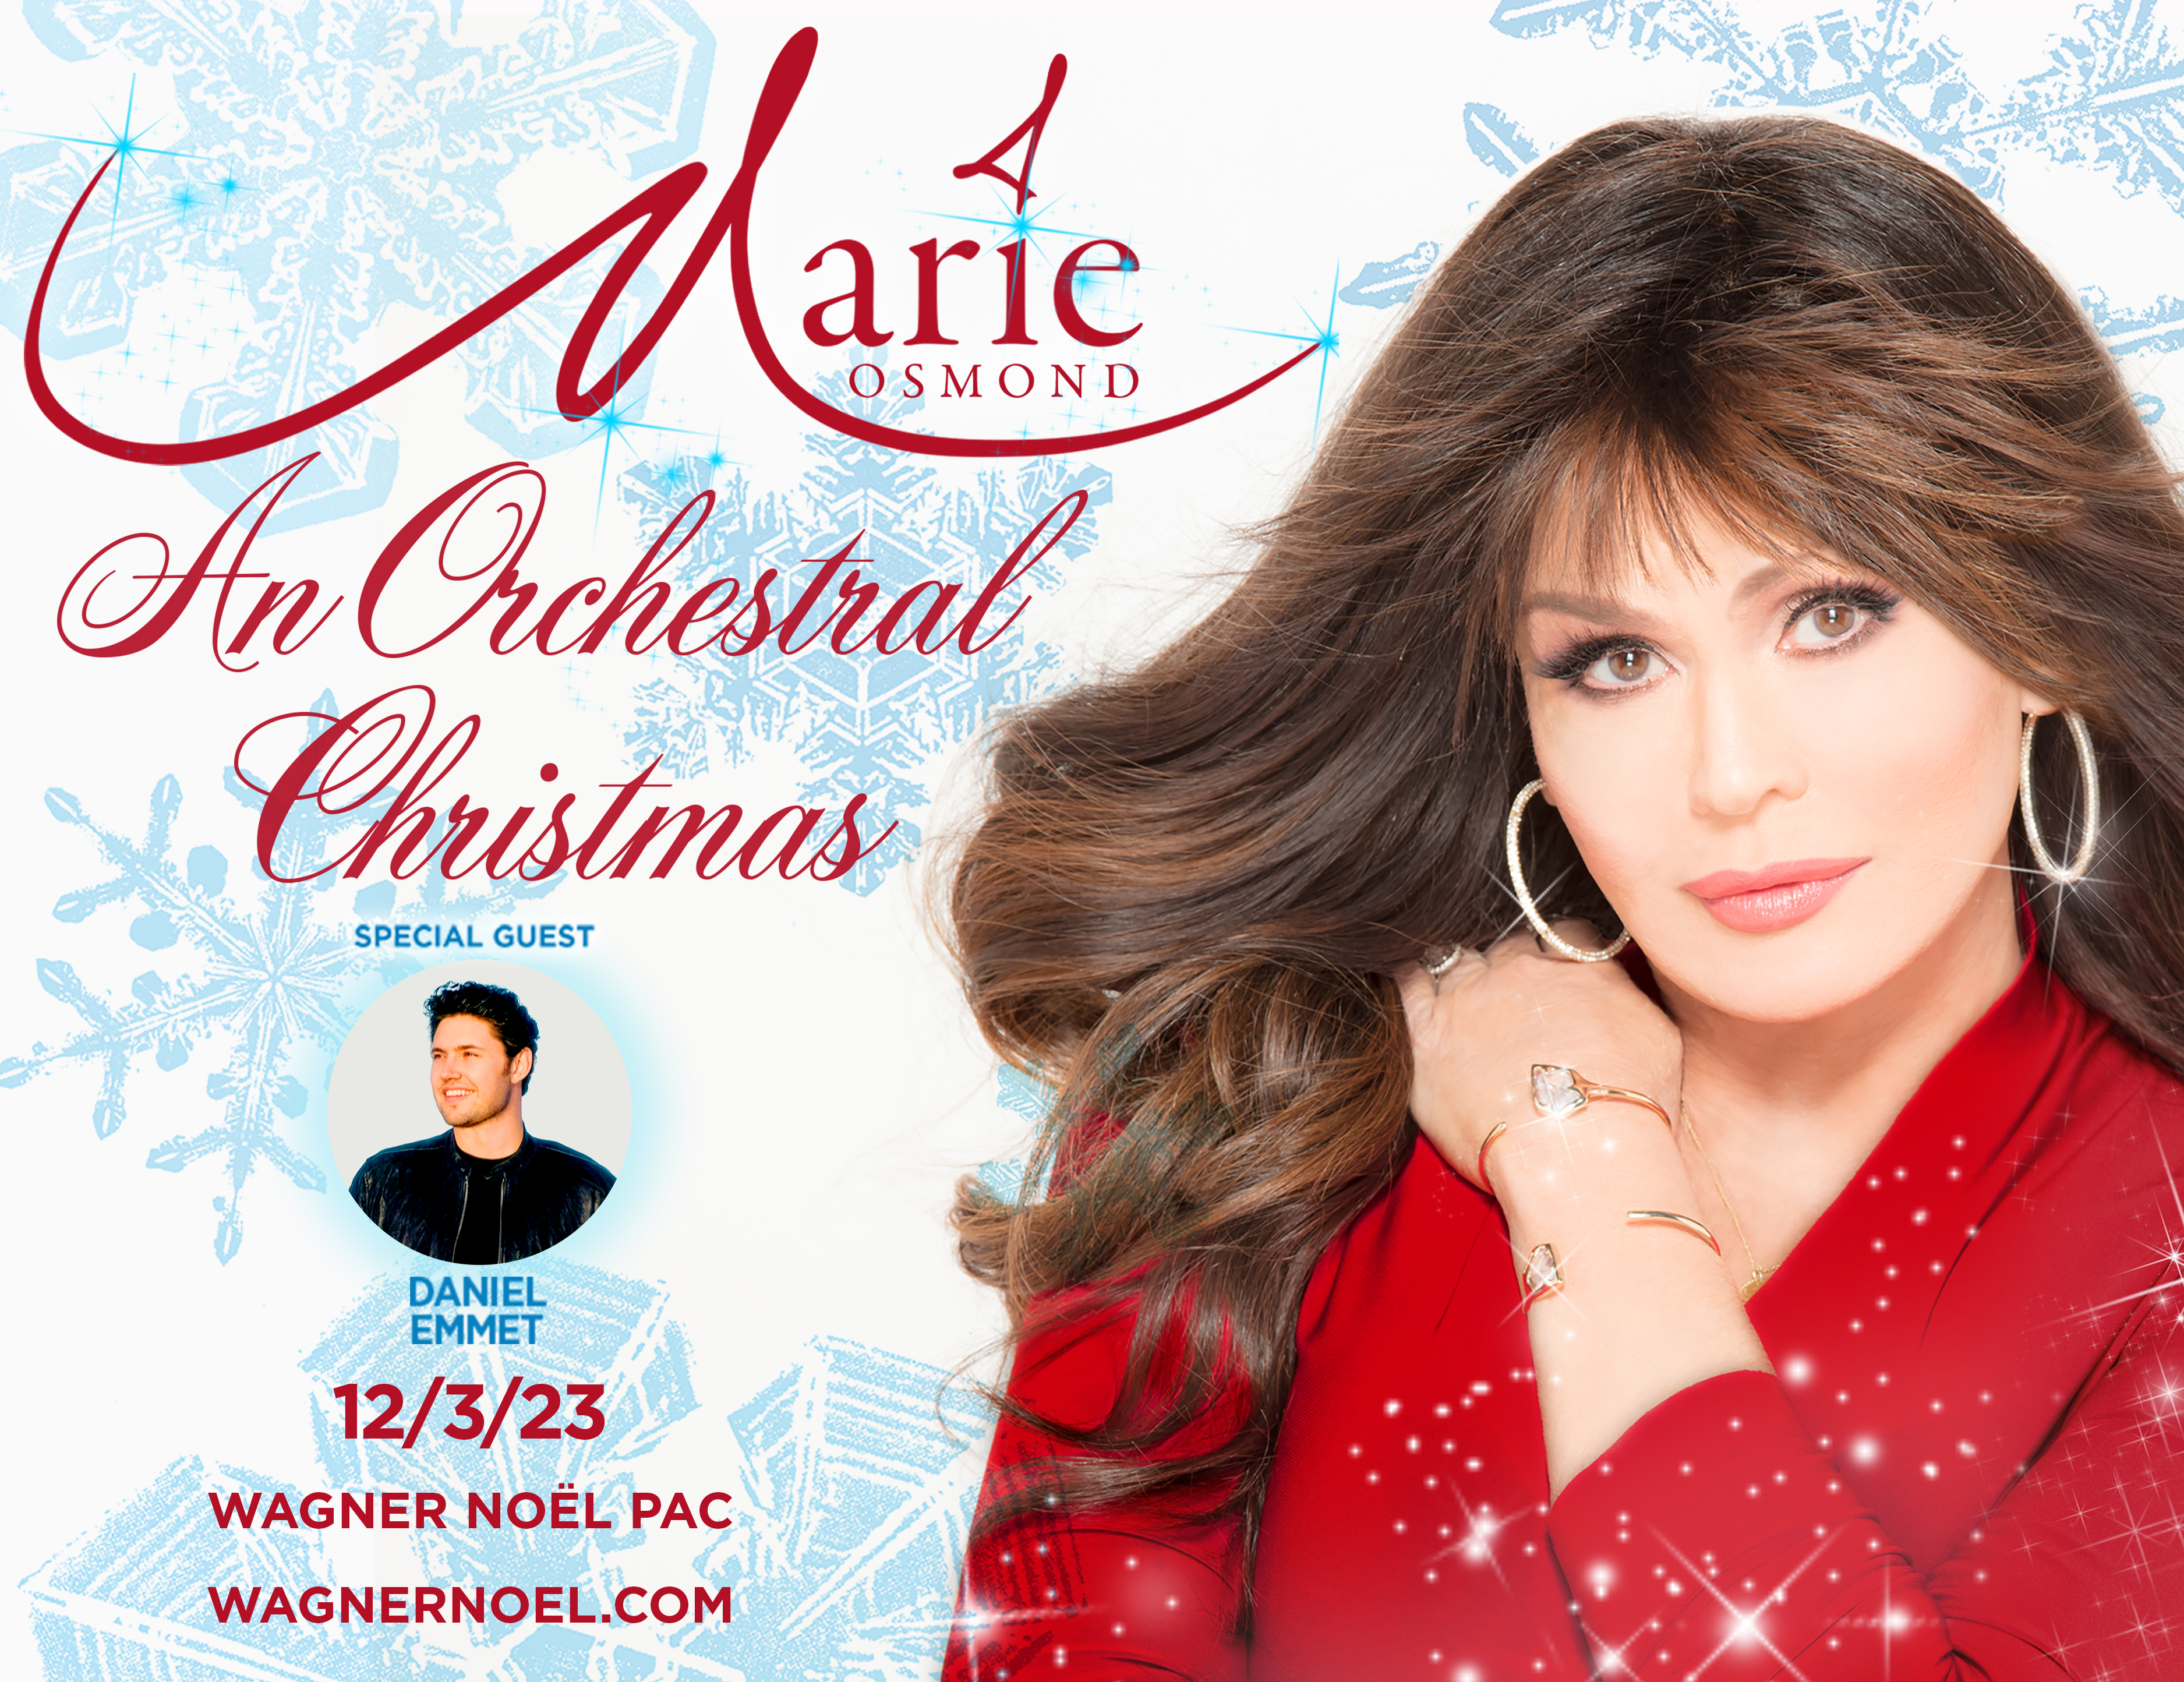 A Marie Osmond Orchestra Christmas with special guest Daniel Emmet